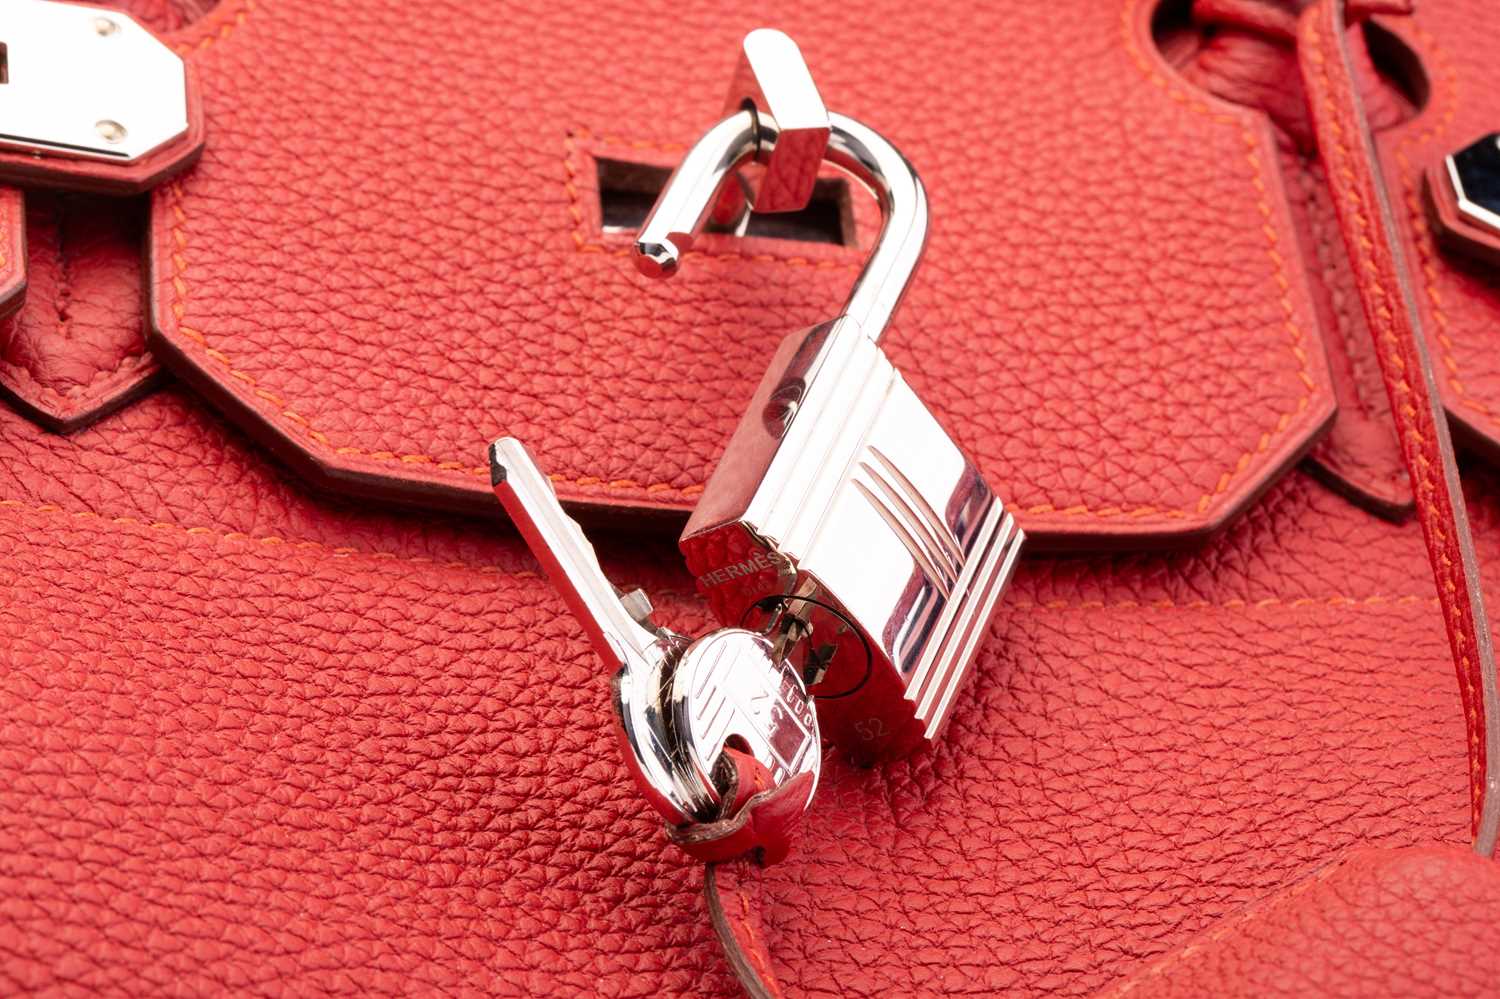 Hermès - a 'Haut à Courroies' HAC Birkin 40 in Capucine Togo leather, 2015, leather-lined body with  - Image 6 of 8